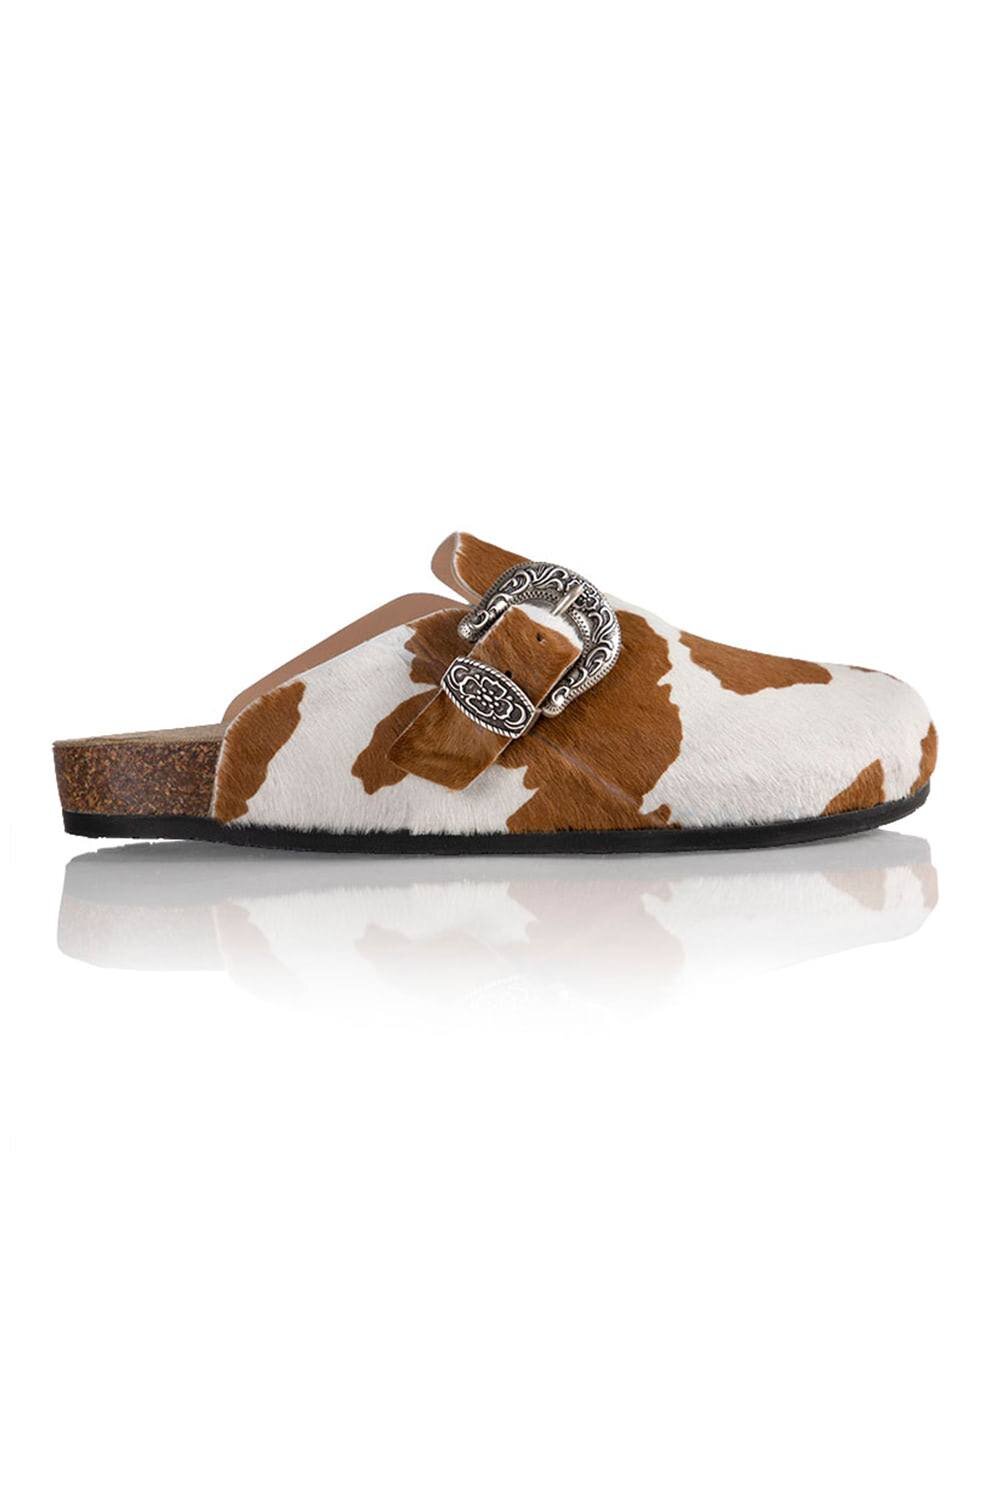 Brother Vellies Greg Shoe in Cow